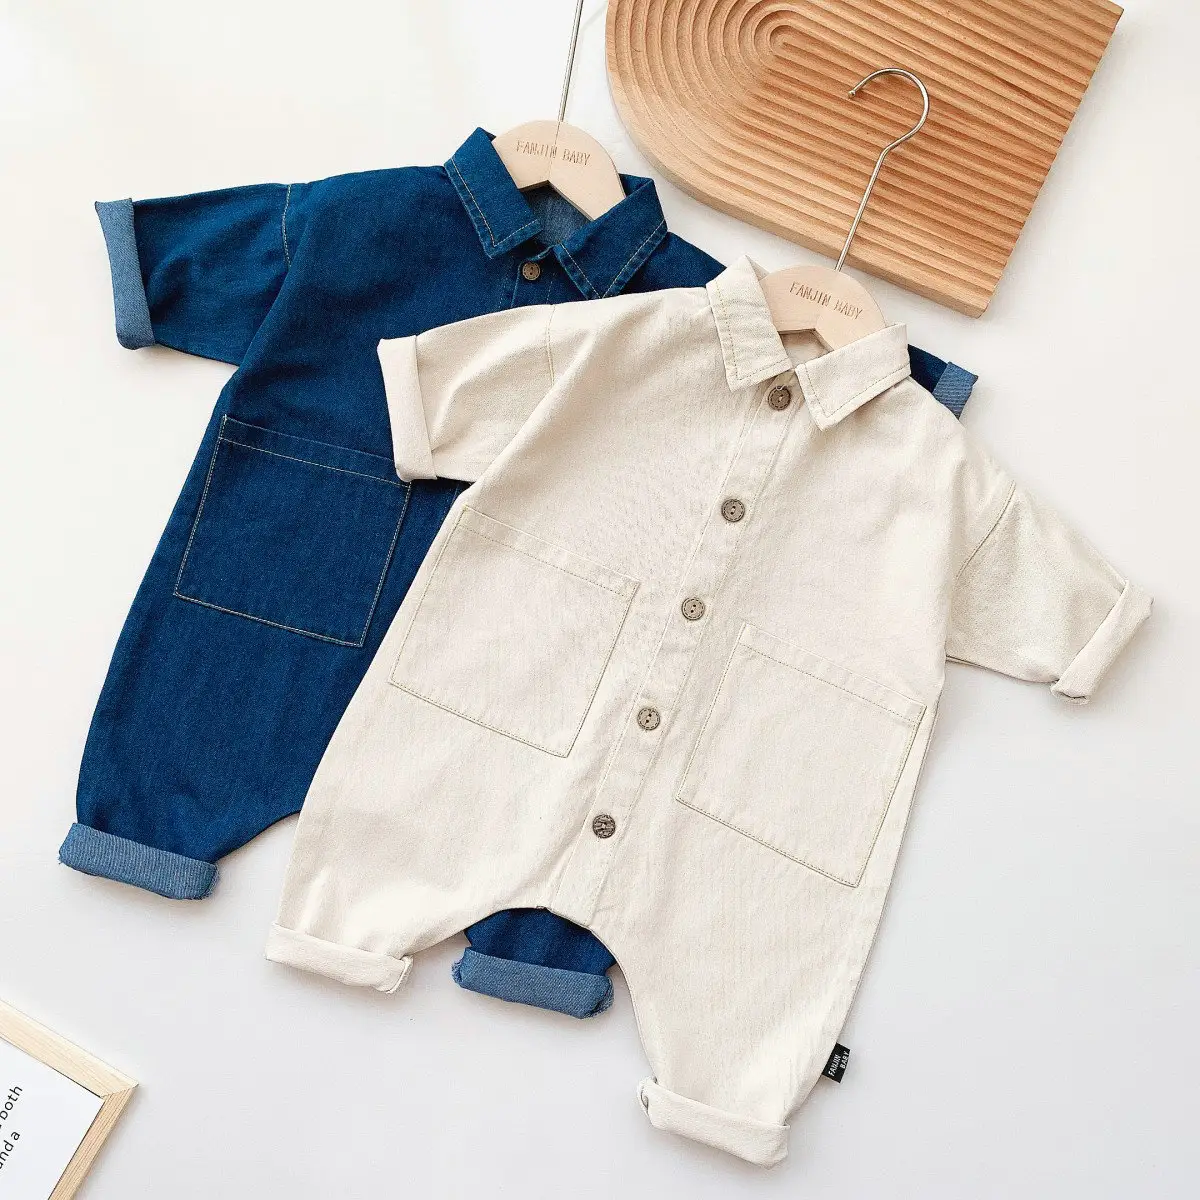 Spring Autumn One-piece Clothes Boys and Girls' Baby Climbing Clothes Newborn Denim Jeans